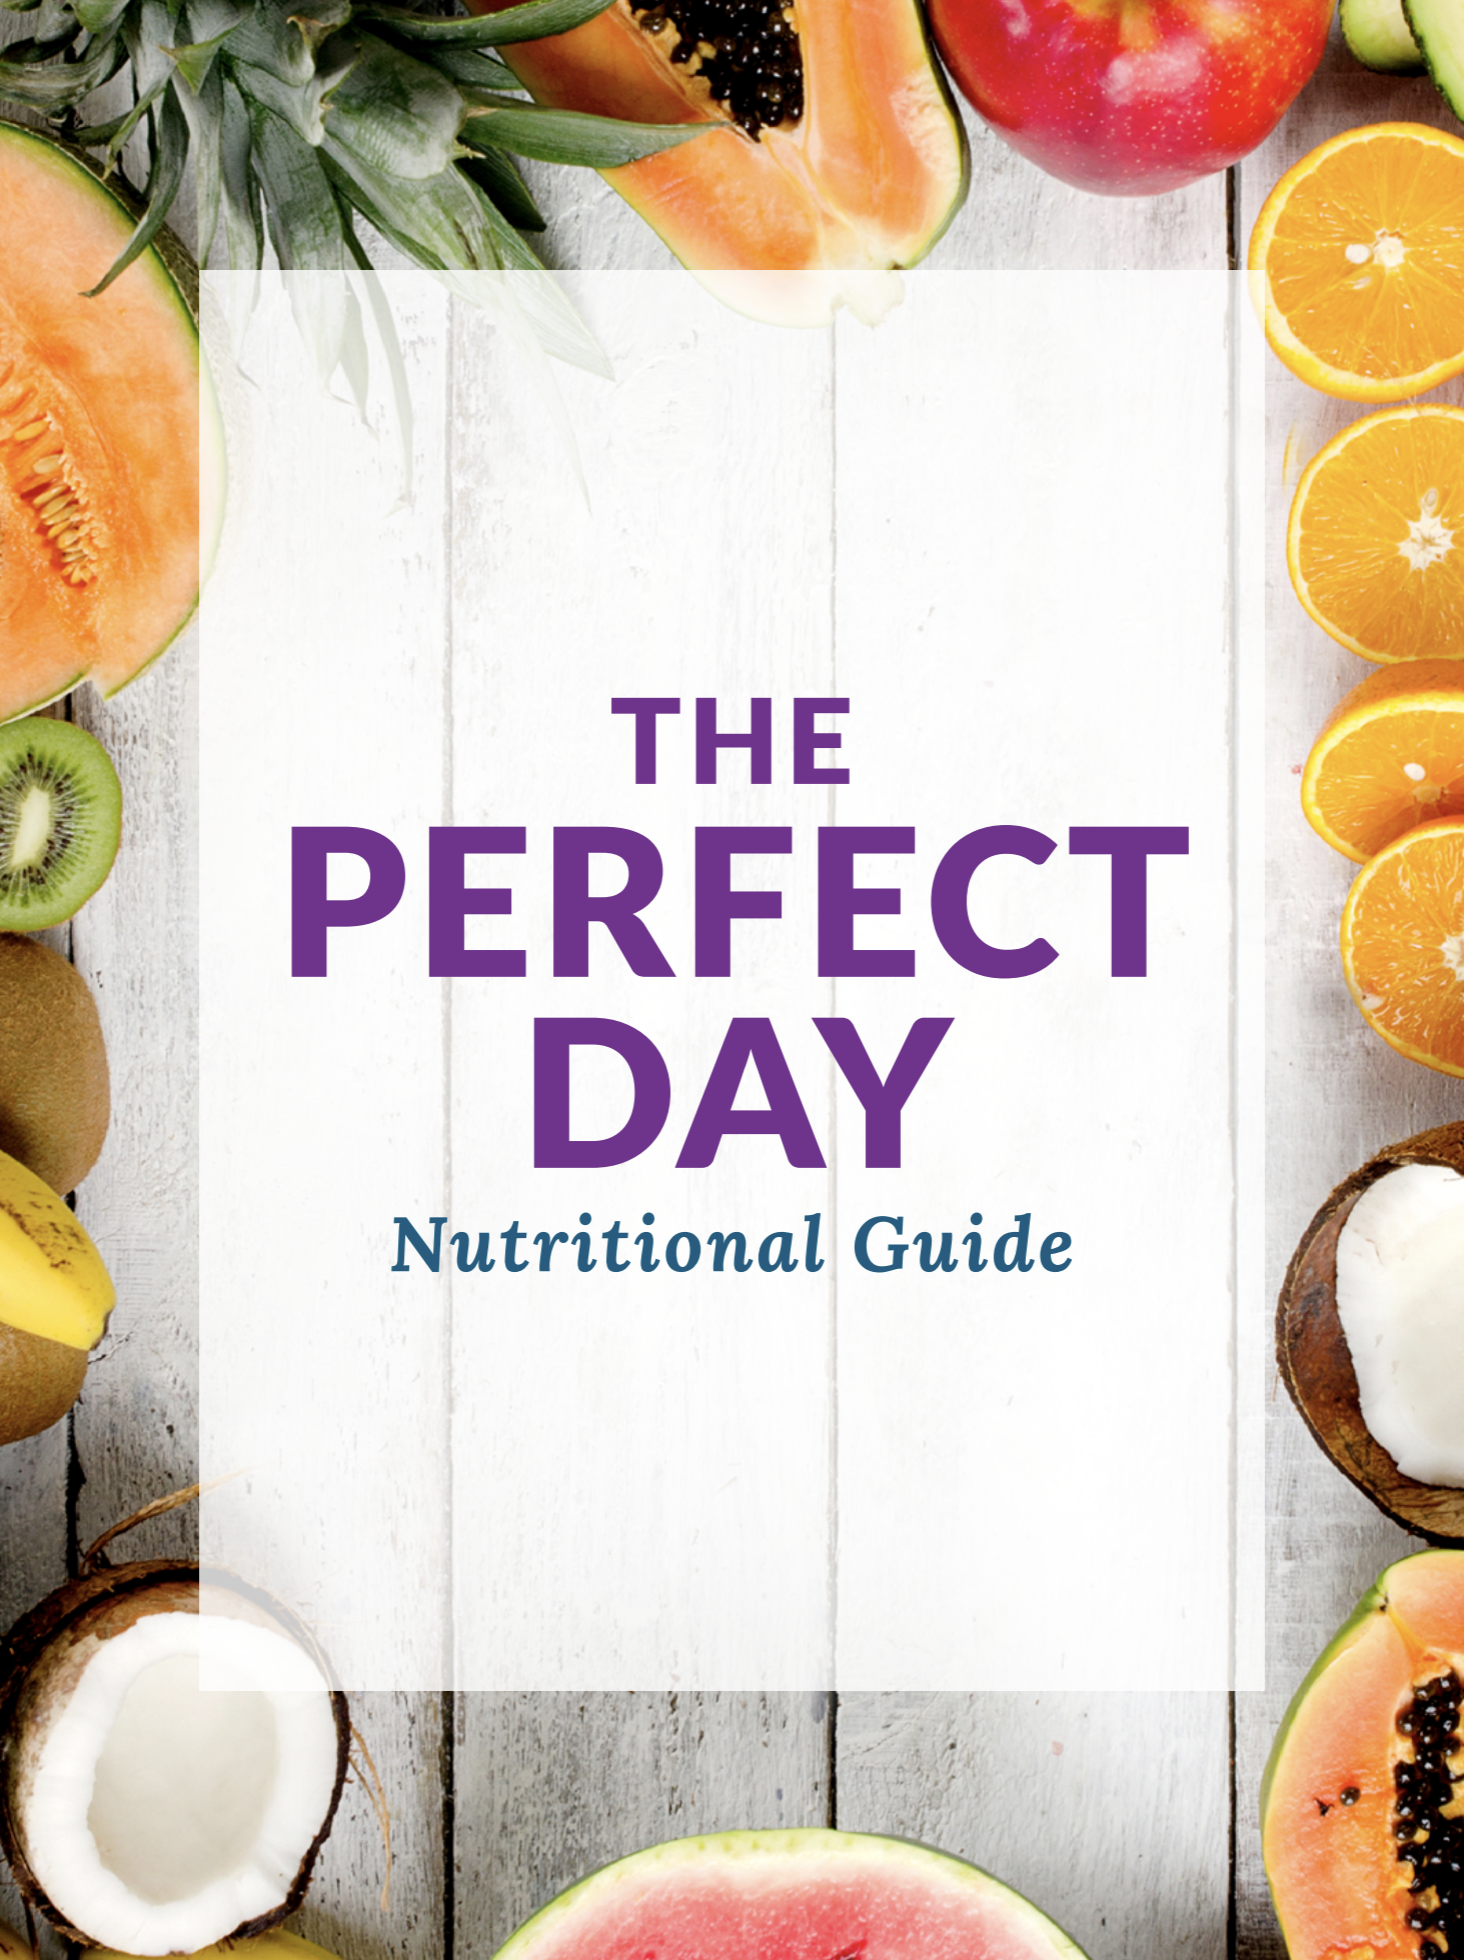 Perfect Day pdf cover with various veggies around it